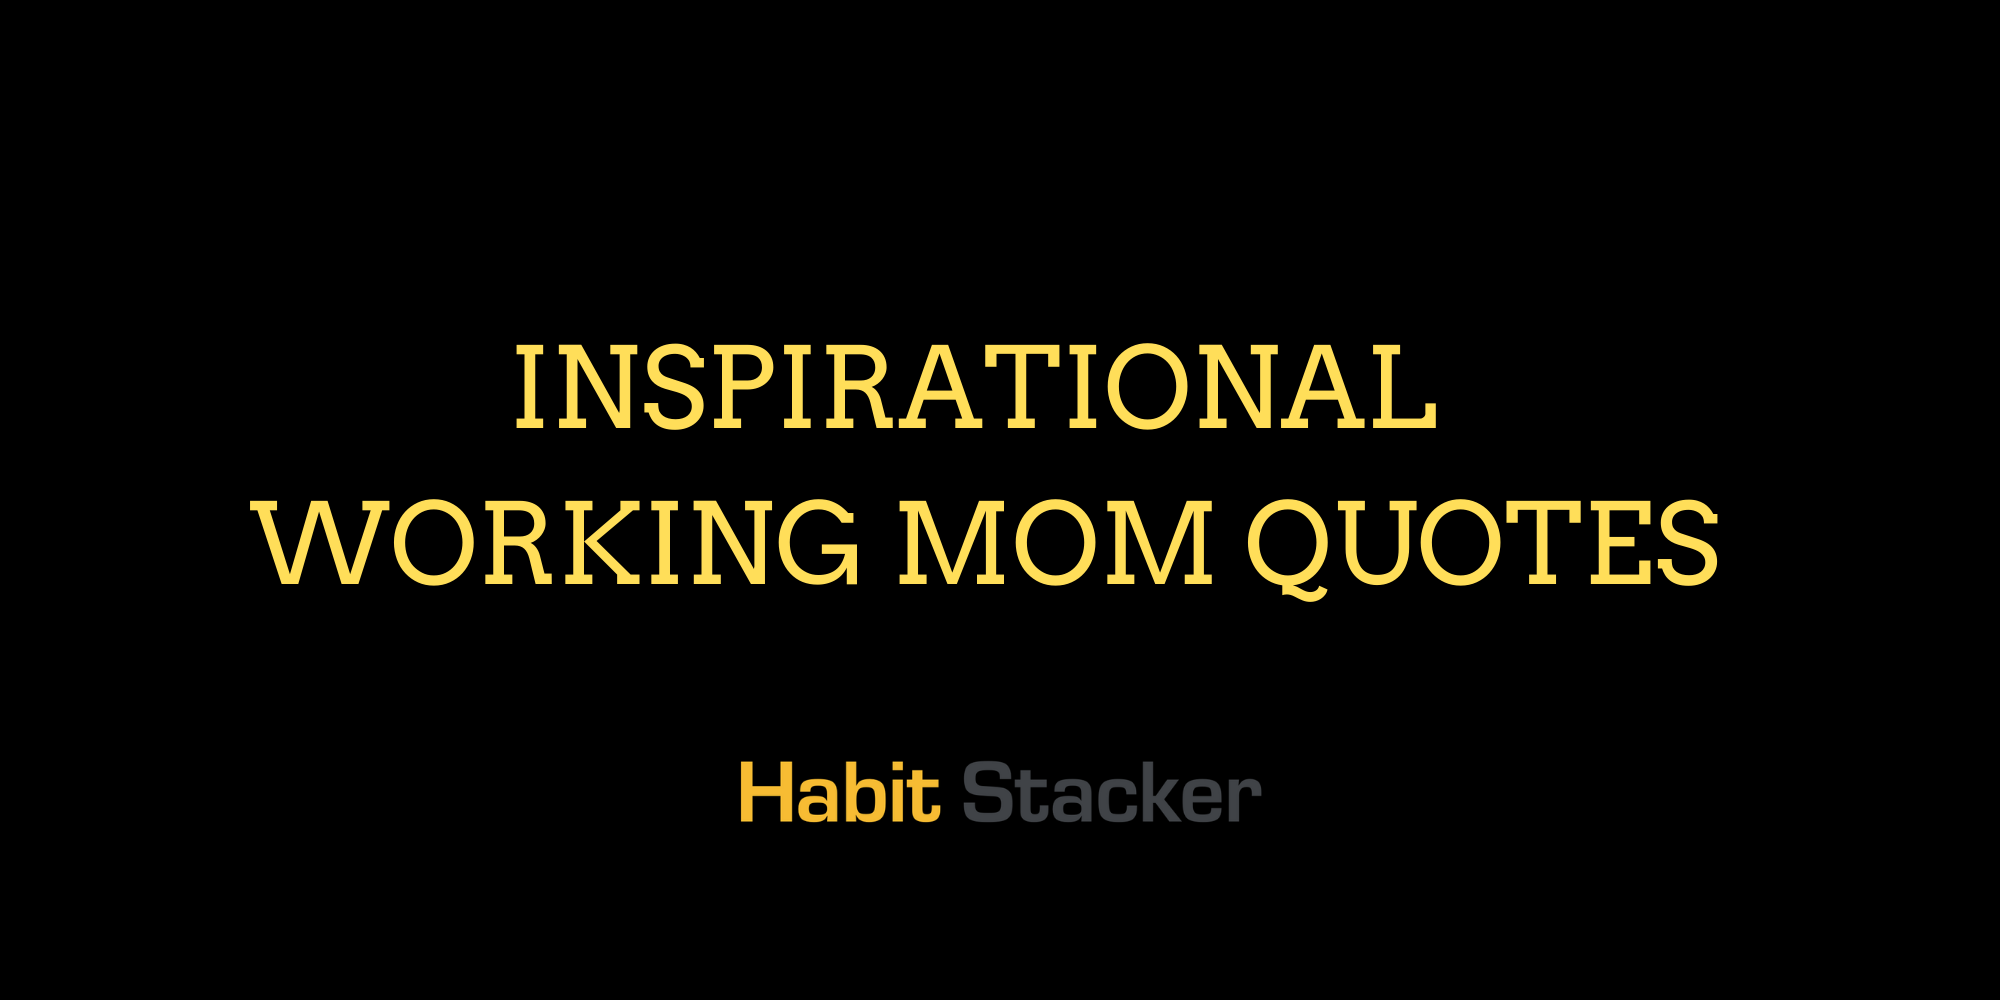 24 Inspirational Working Mom Quotes | Habit Stacker